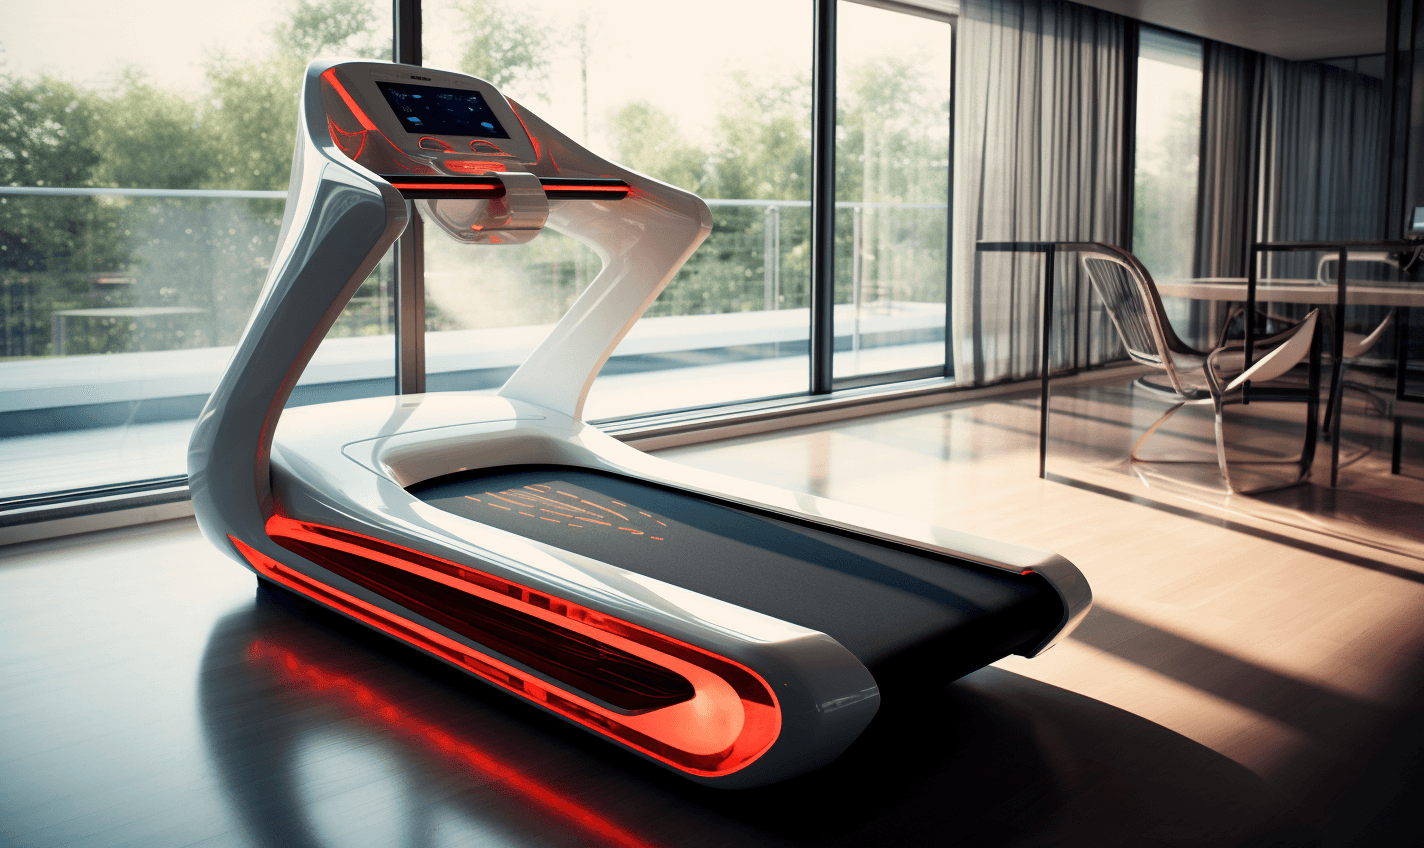 How to Lubricate a Treadmill for Smooth Workouts